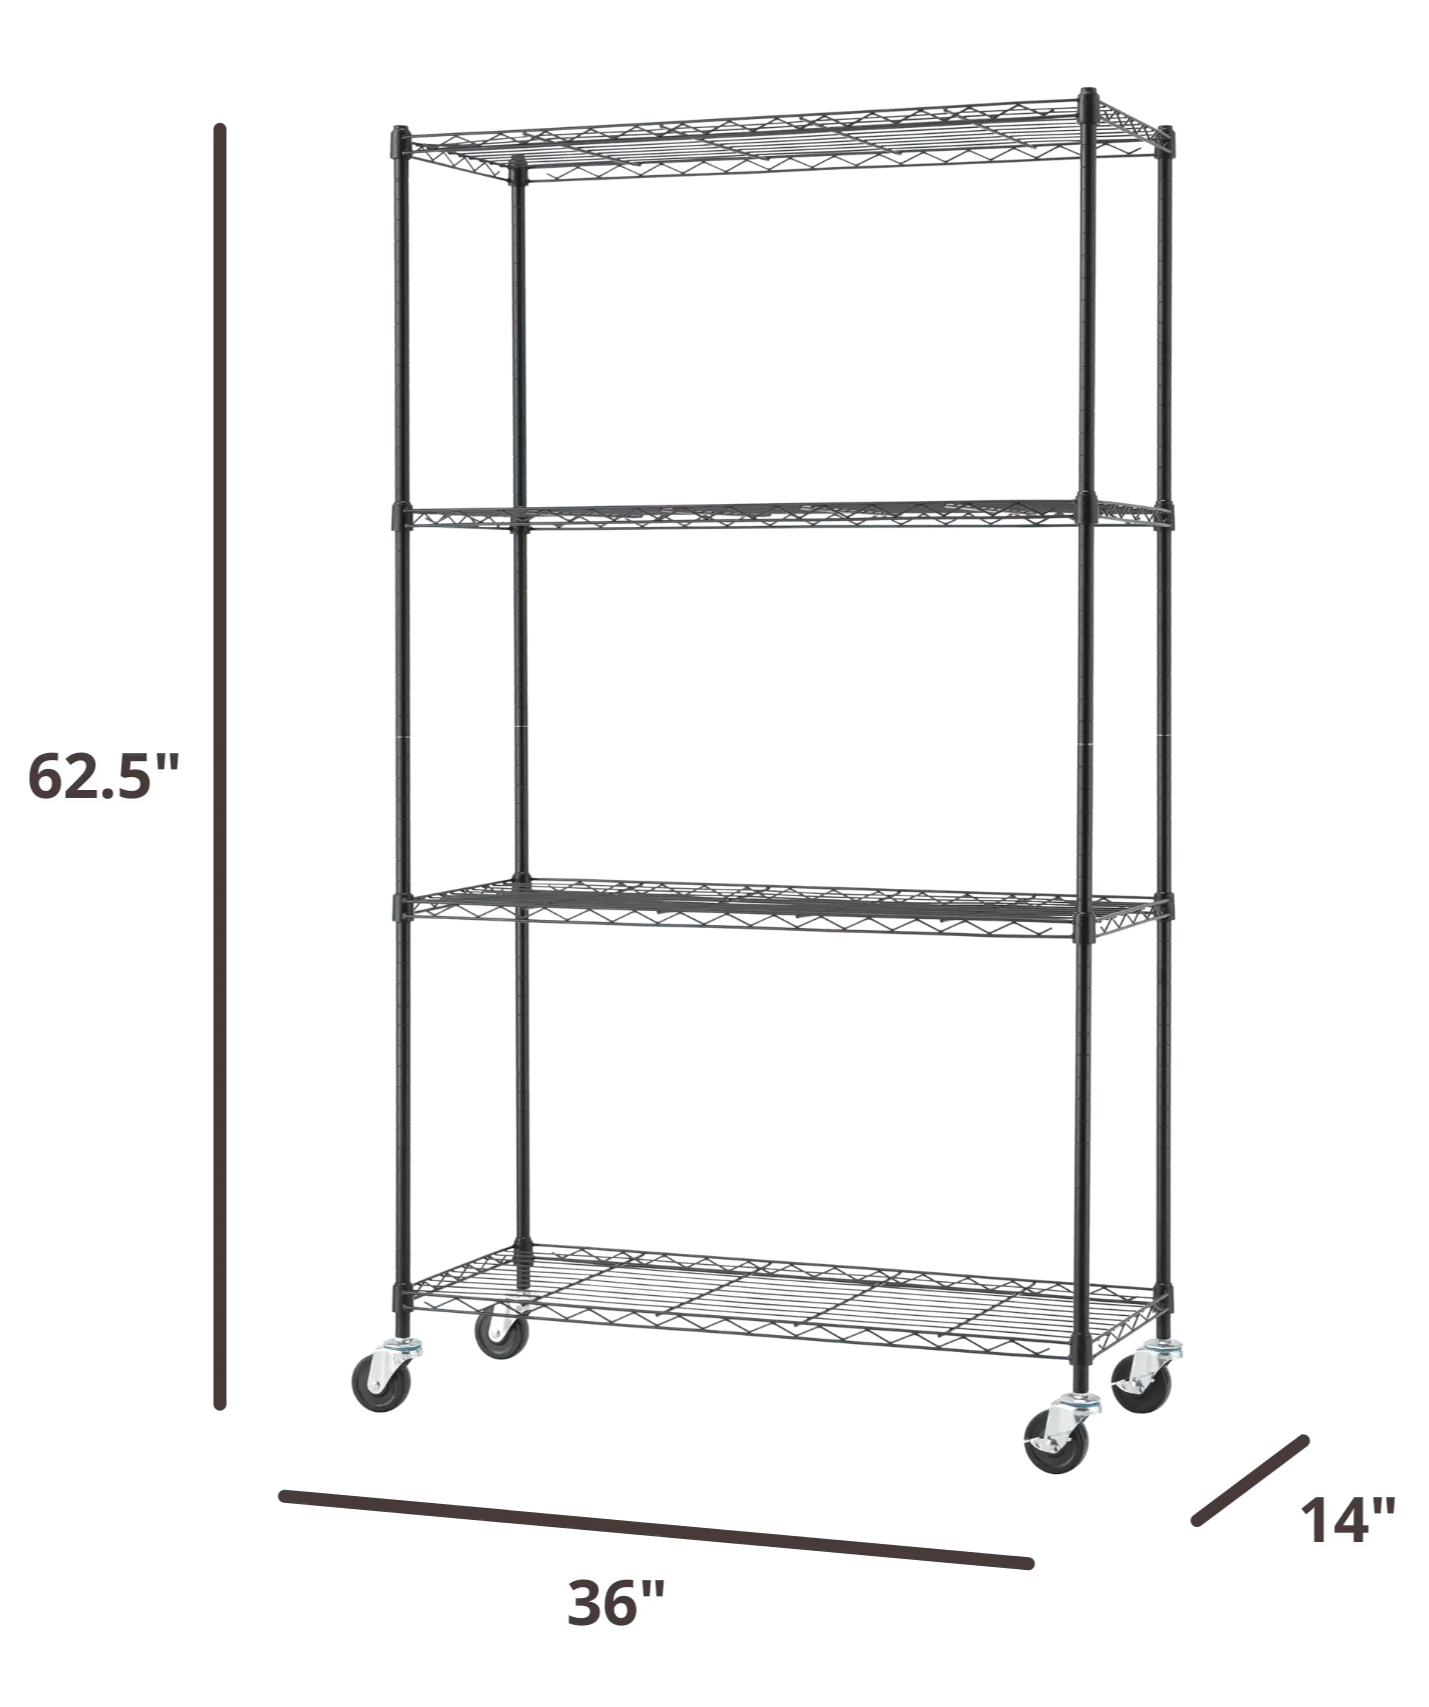 62.5 inches tall by 36 inches wide black wire shelving rack